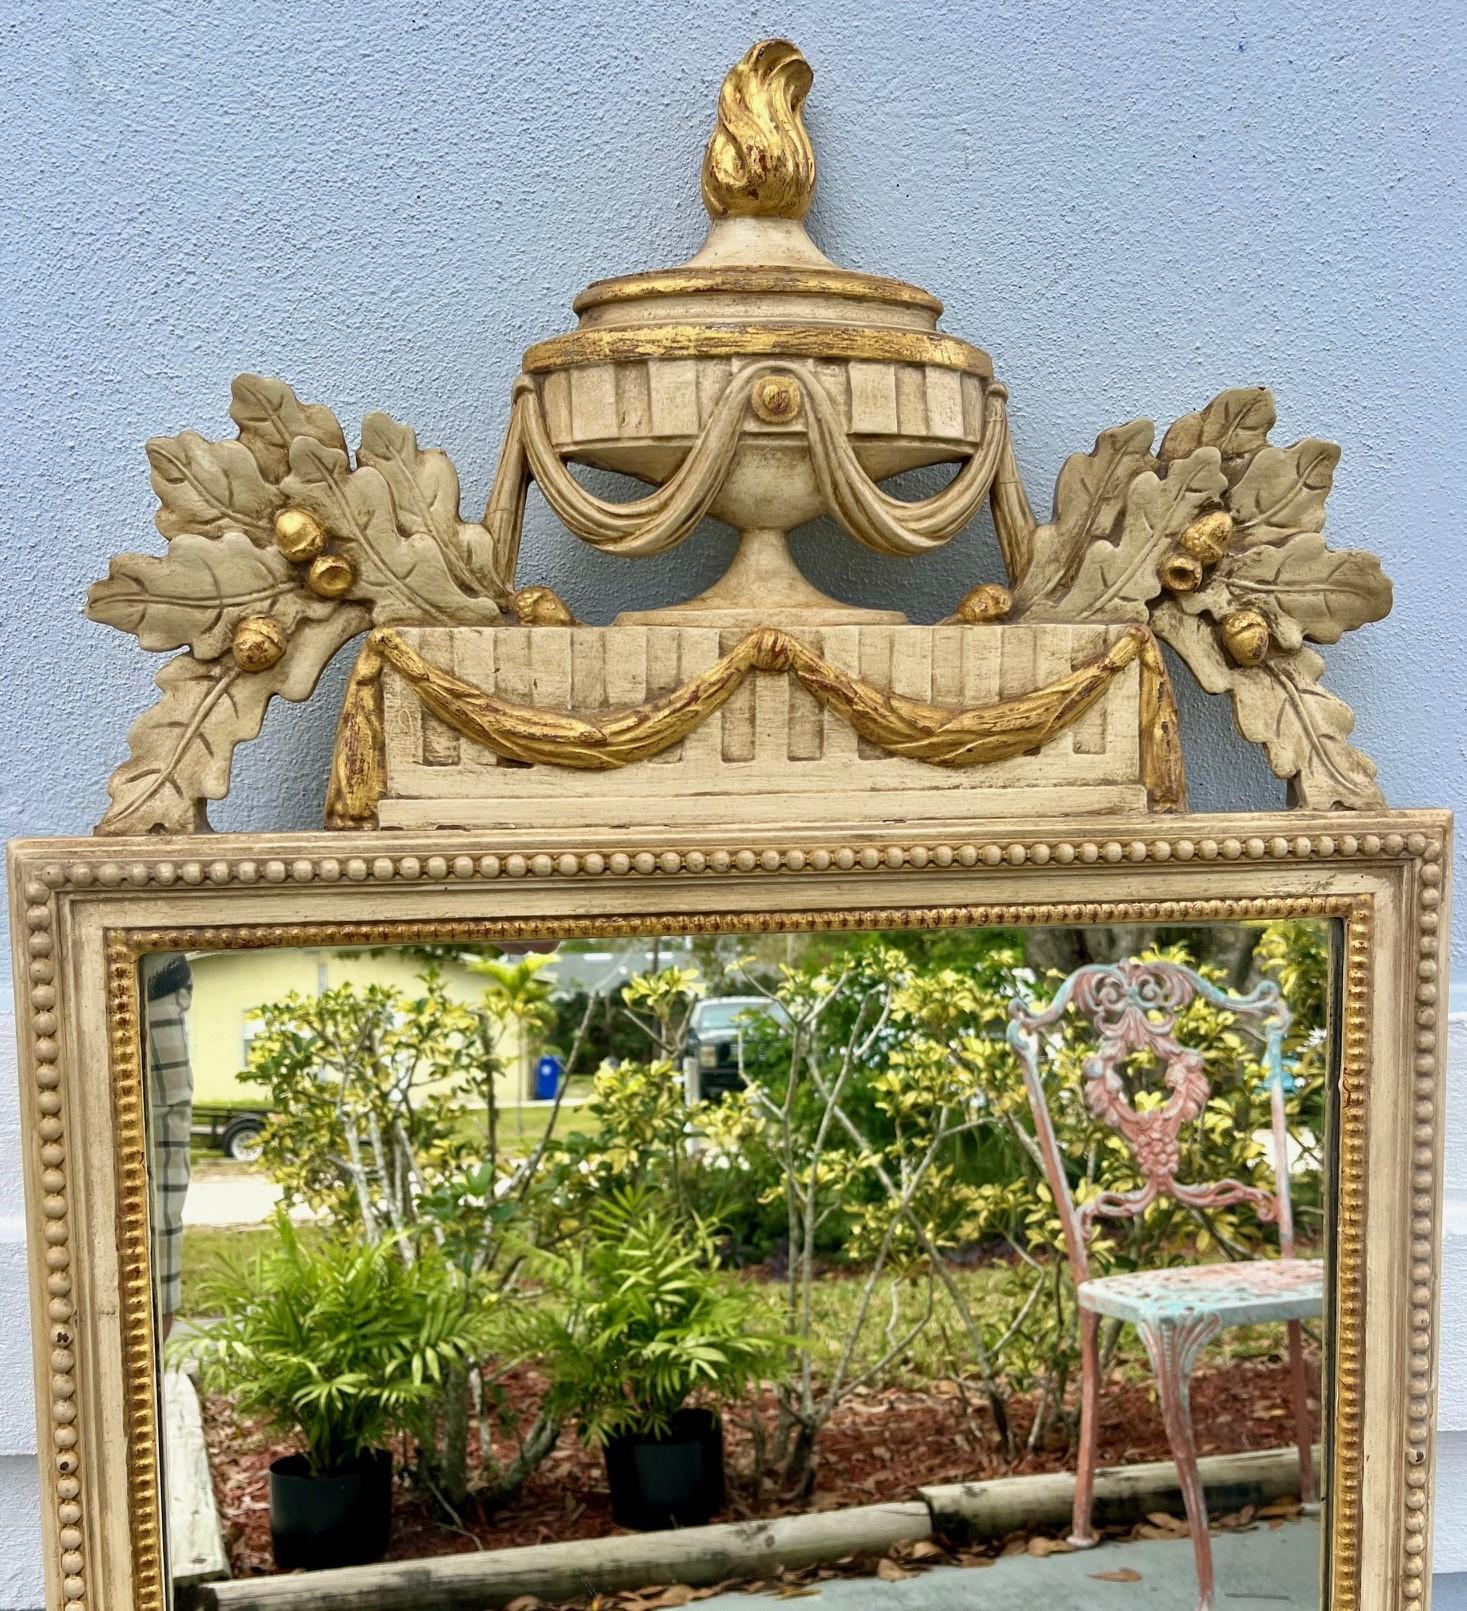 French Louis XVI Style Cream and Gilt Painted Wall Mirror

Elegant wall mirror with hand carved pediment. This piece is created in the early 20th century in France. The frame is beaded with gilt highlights. The pediment features a classical center